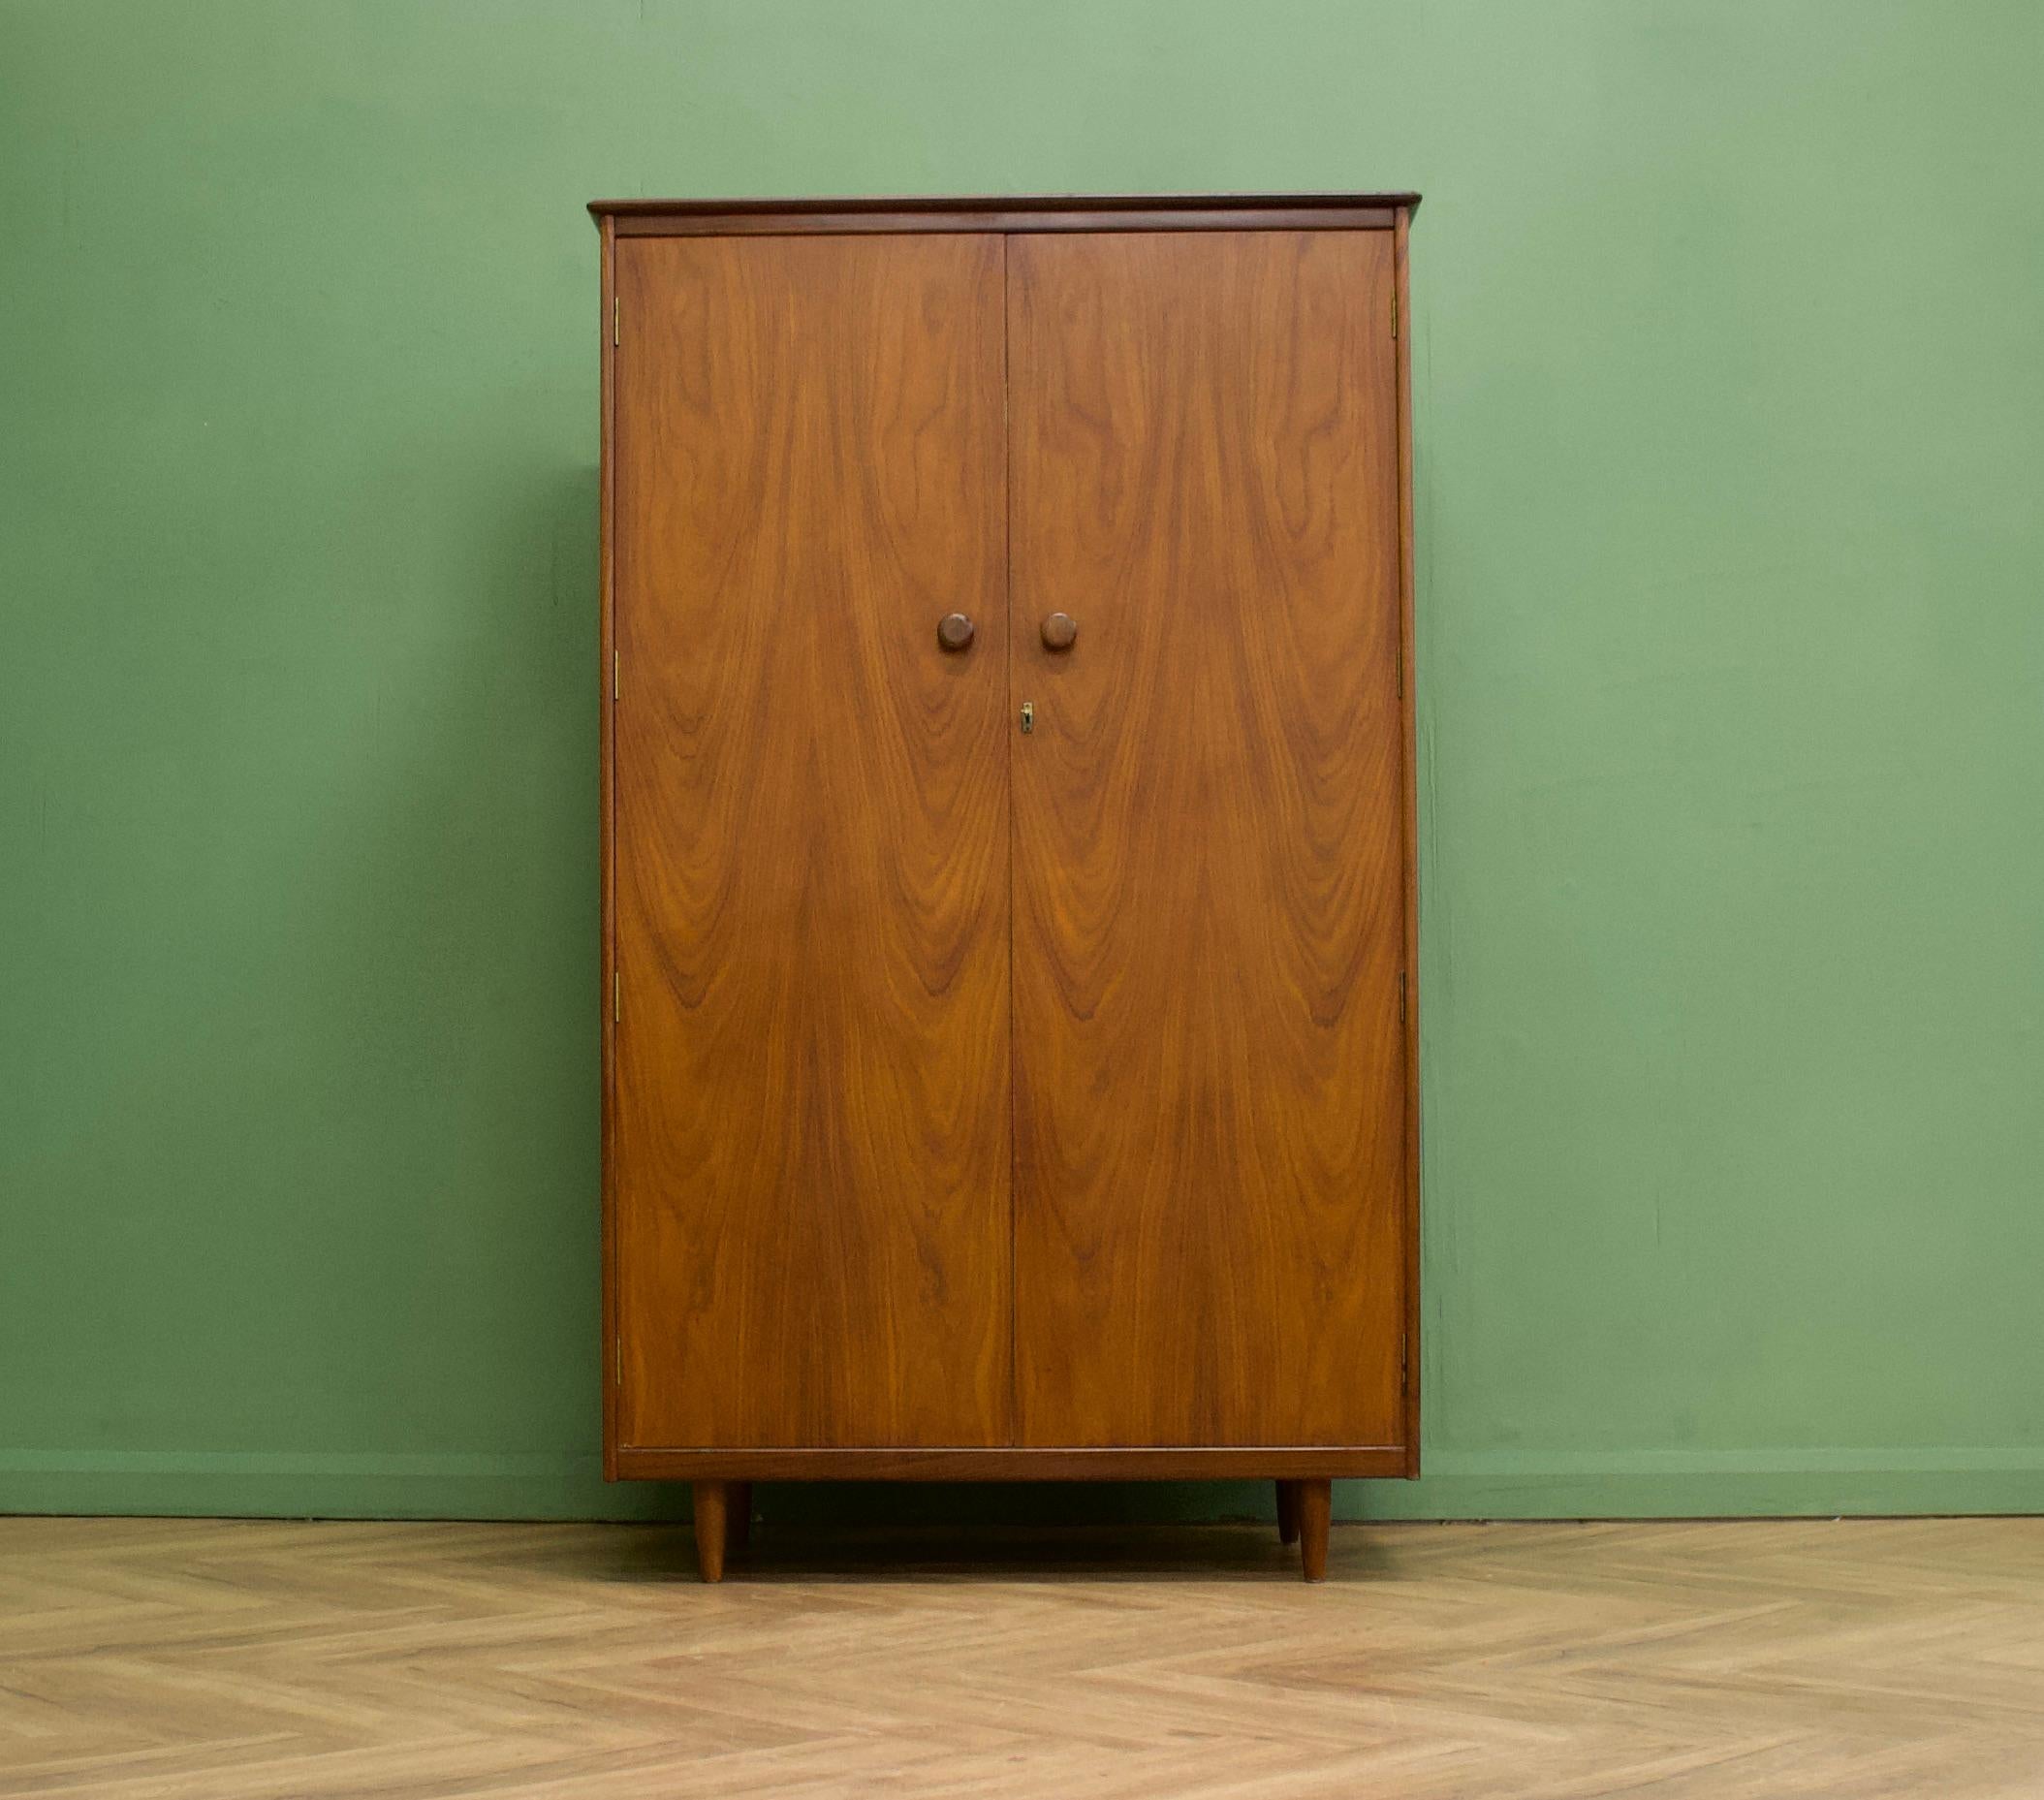 A walnut freestanding wardrobe by Butilux - circa 1960s
Internally there is a hanging rail, shelves , drawers and compartments - a lot of storage for such a compact wardrobe
The attractive legs are slightly tapered and the handles are solid wood -